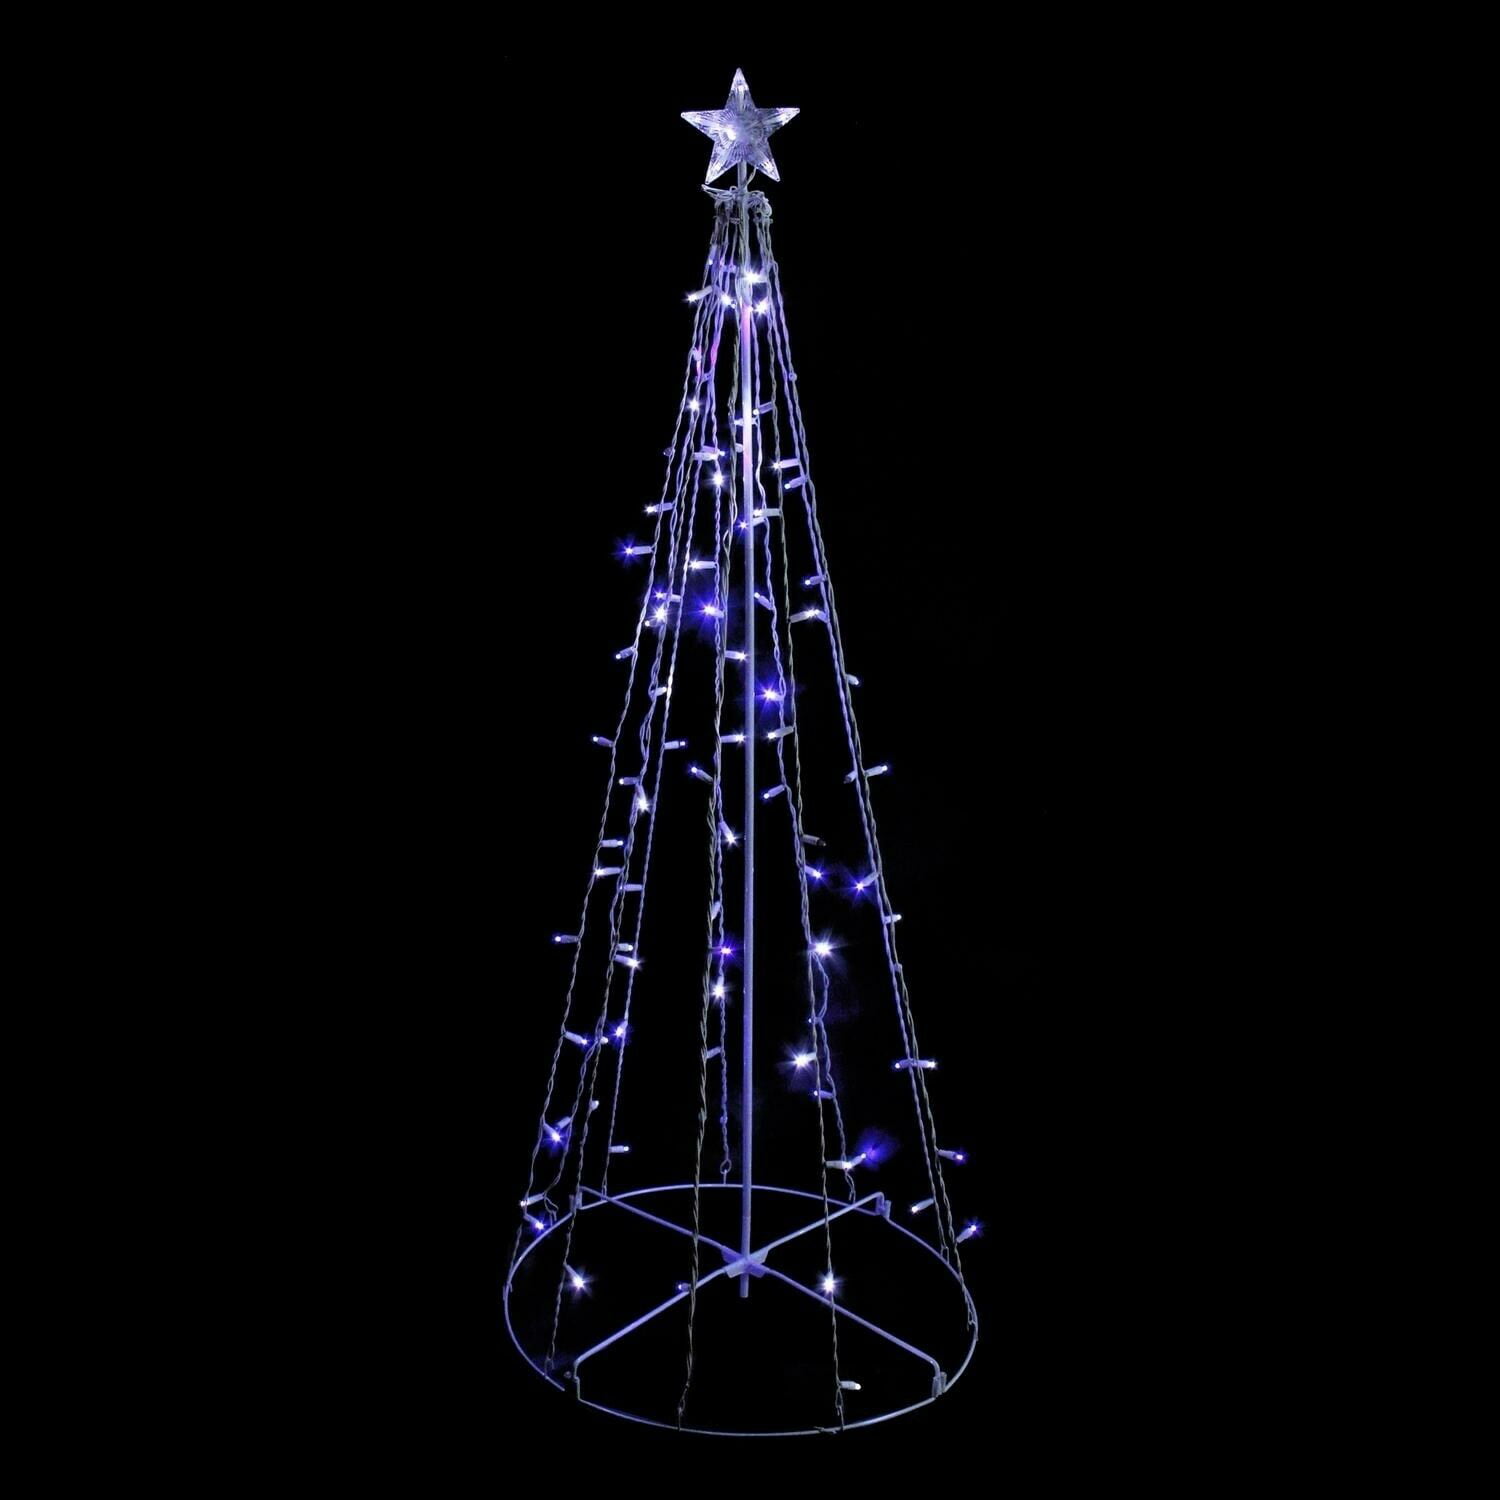 5 Blue & White LED Lighted Twinkling Show Cone Christmas Tree Outdoor - Walmart.com